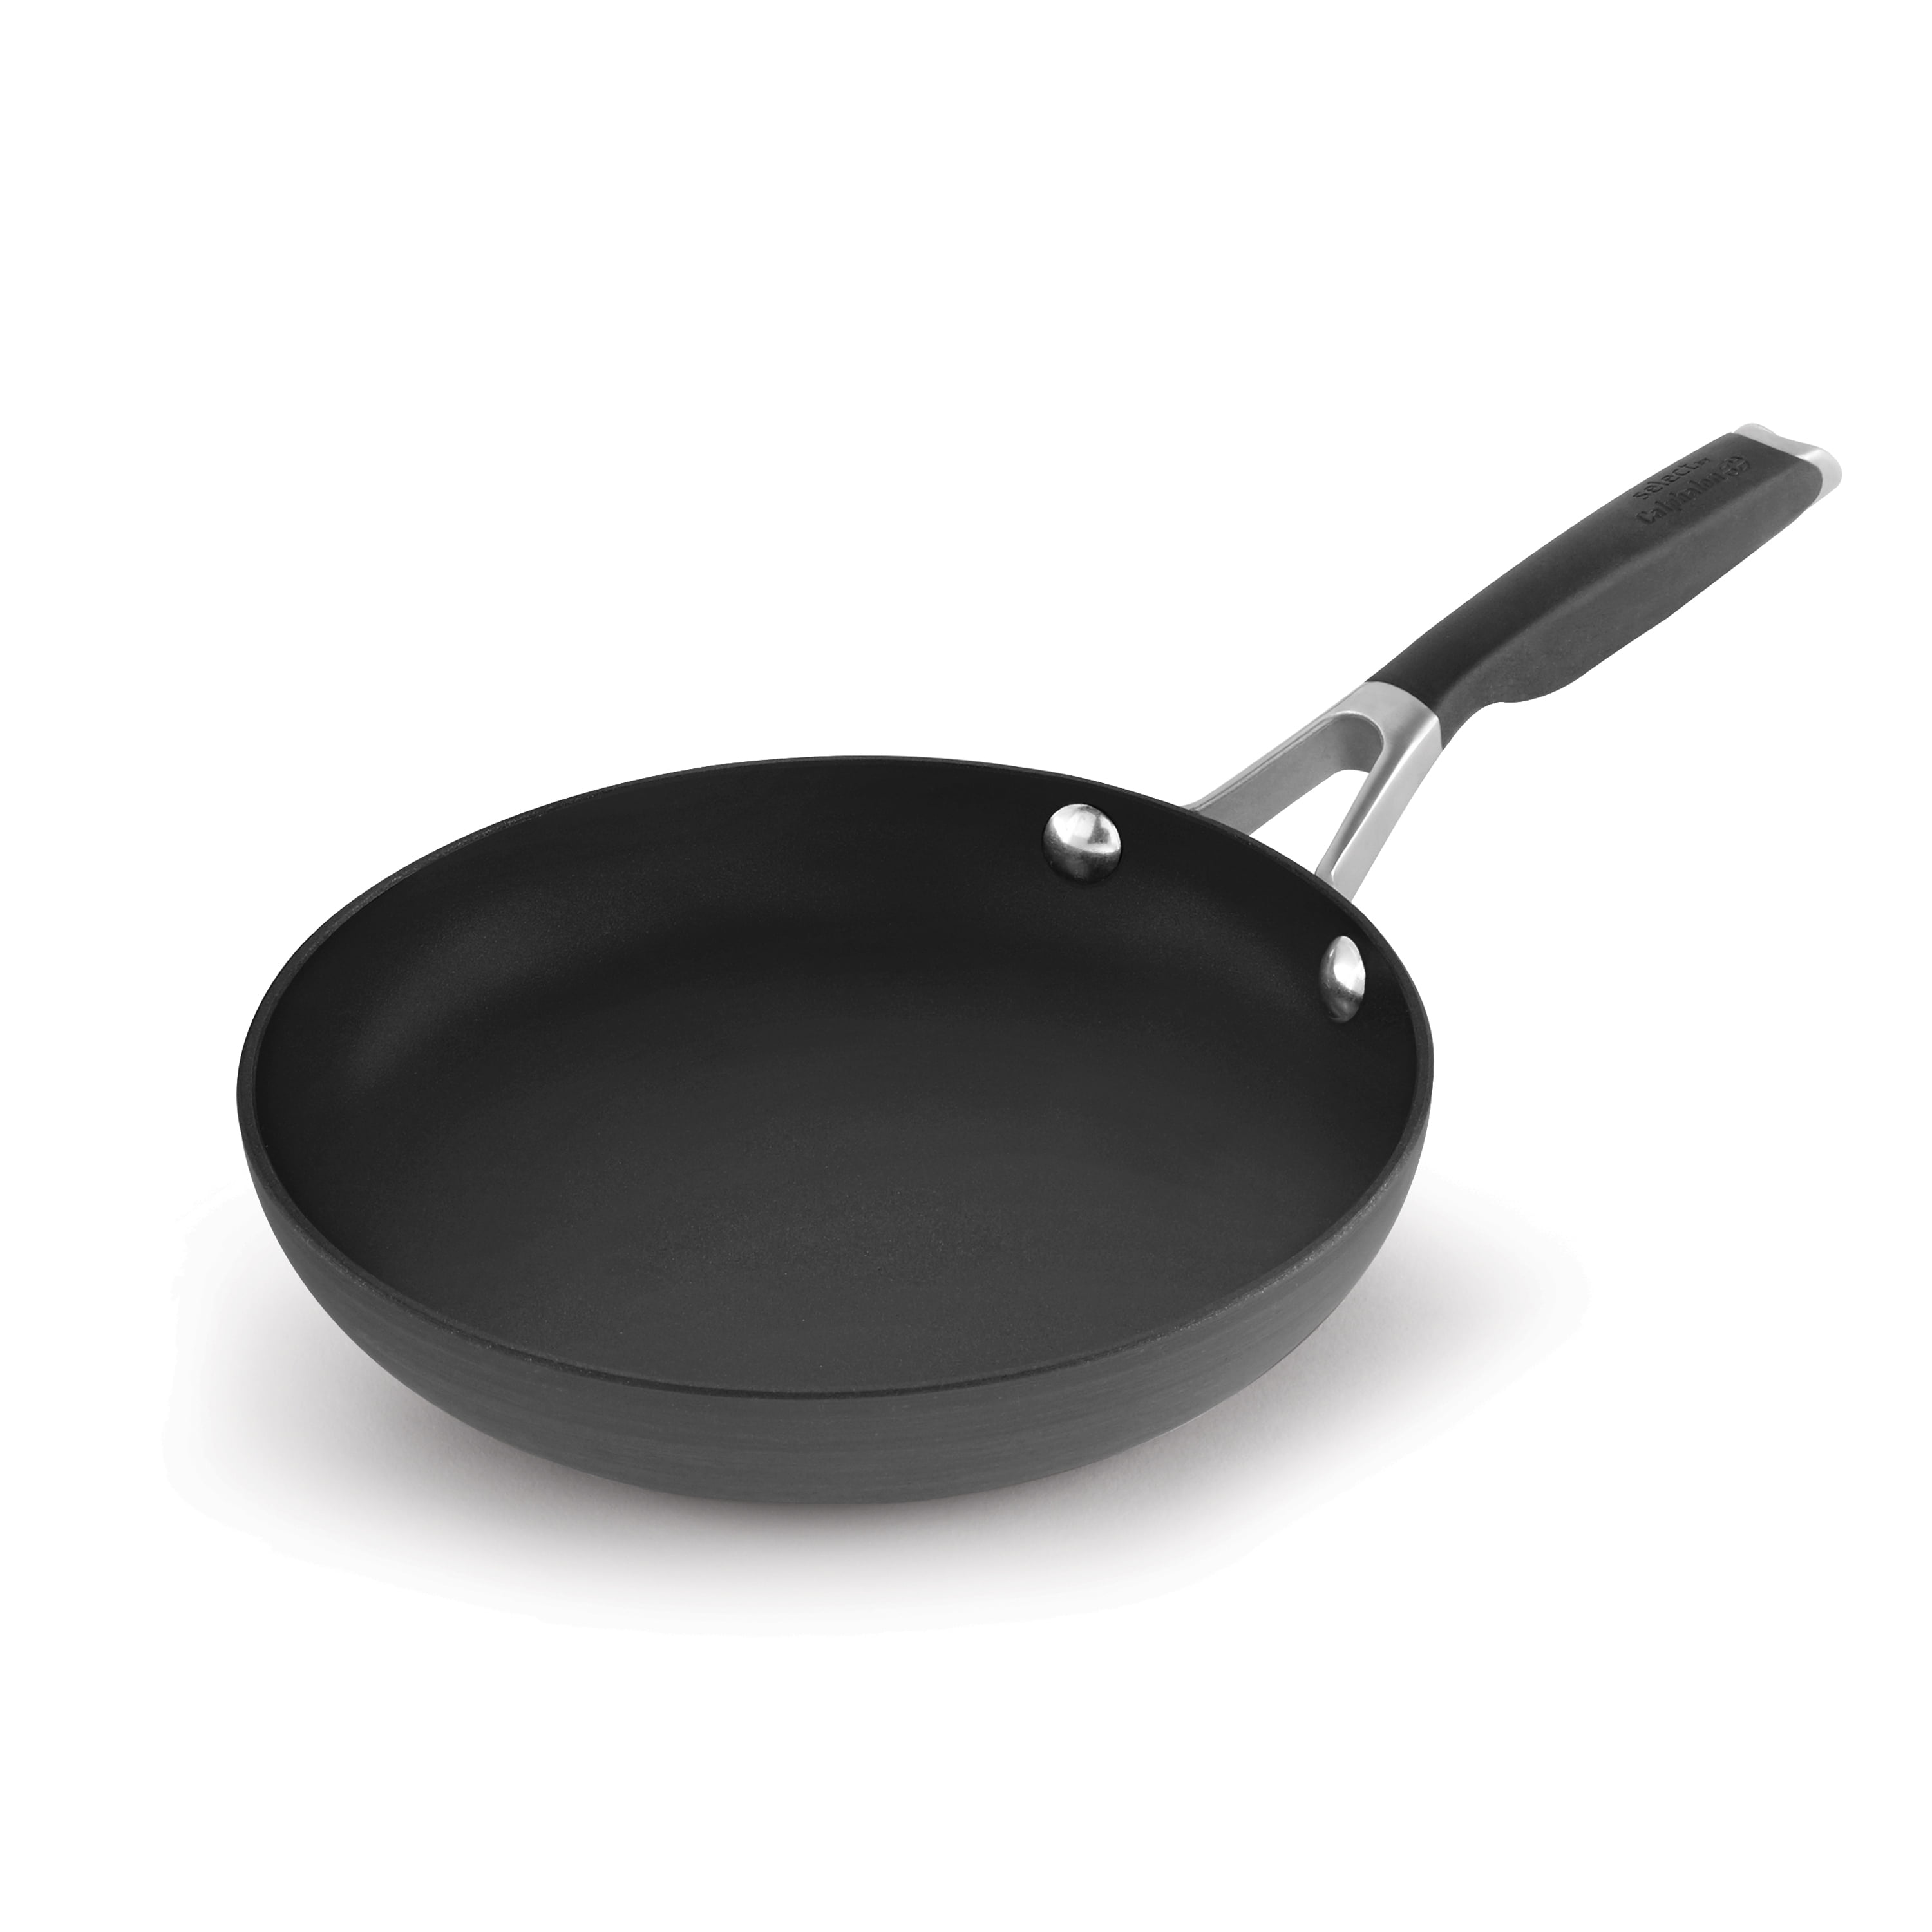 Hard Anodized Nonstick 12 Inch Fry Pan With Lid Dishwasher Safe Frying Pan Black 